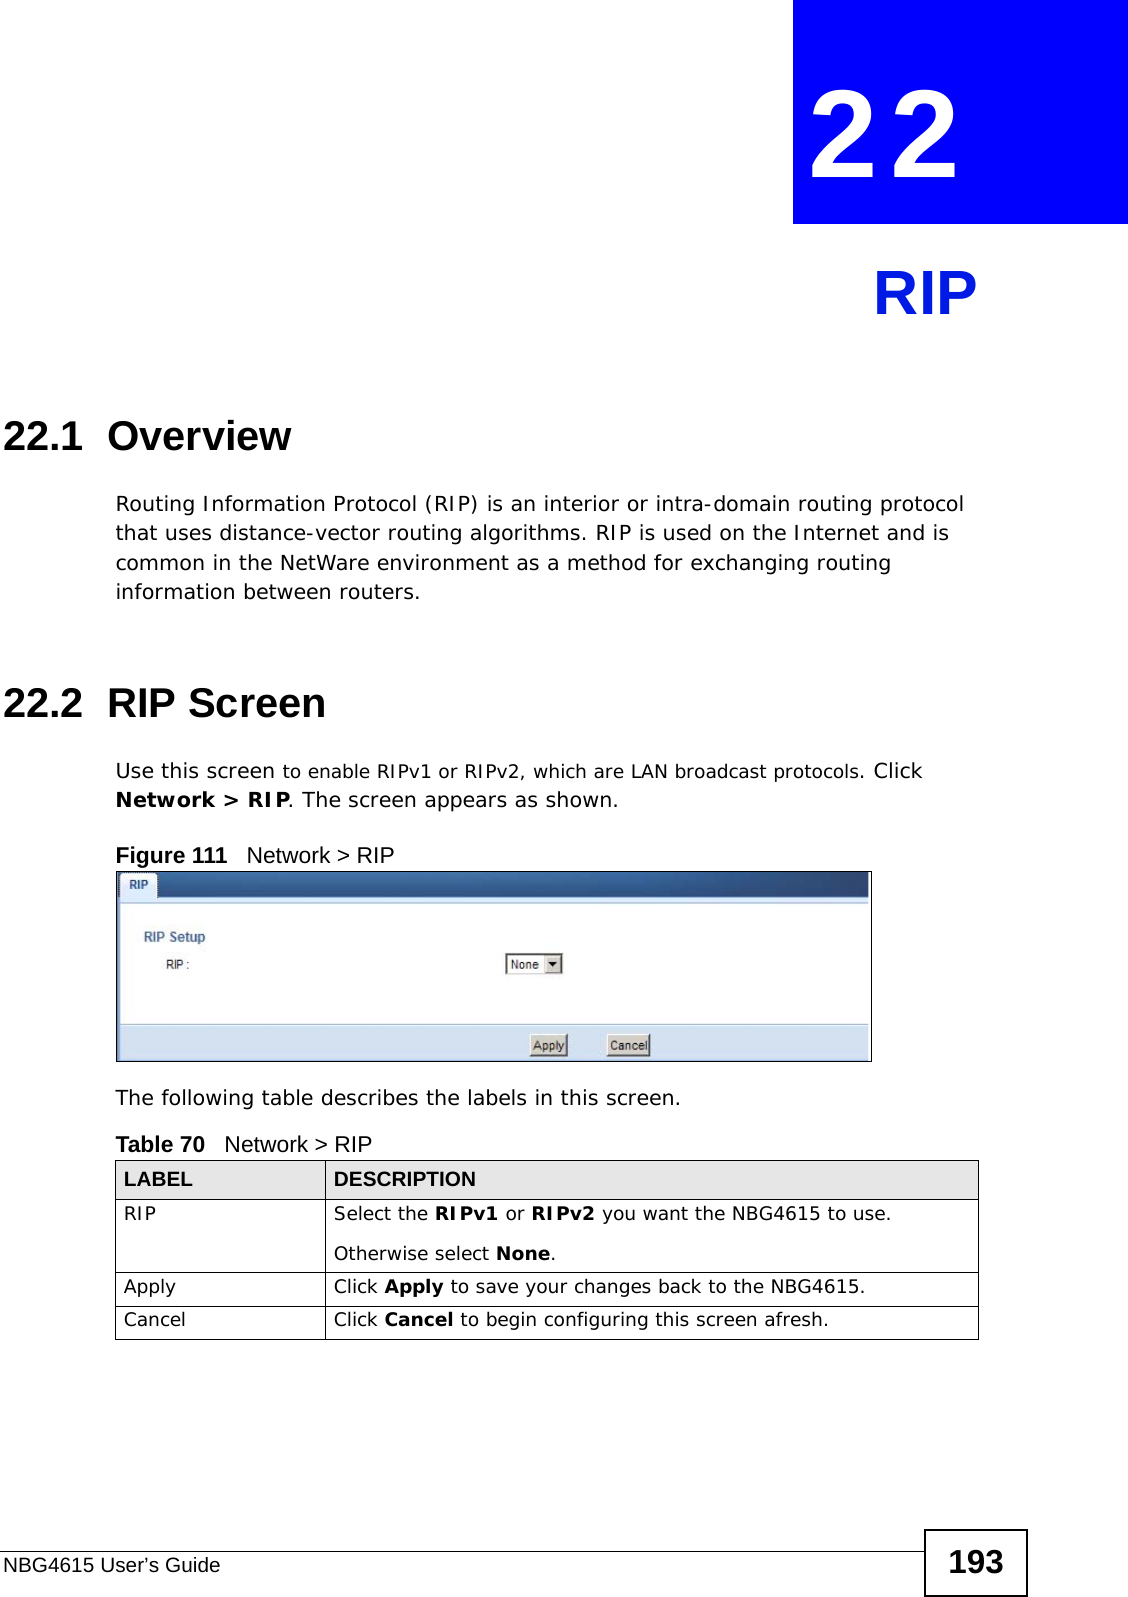 NBG4615 User’s Guide 193CHAPTER  22 RIP22.1  Overview Routing Information Protocol (RIP) is an interior or intra-domain routing protocol that uses distance-vector routing algorithms. RIP is used on the Internet and is common in the NetWare environment as a method for exchanging routing information between routers.22.2  RIP Screen   Use this screen to enable RIPv1 or RIPv2, which are LAN broadcast protocols. Click Network &gt; RIP. The screen appears as shown.Figure 111   Network &gt; RIPThe following table describes the labels in this screen.Table 70   Network &gt; RIPLABEL DESCRIPTIONRIP Select the RIPv1 or RIPv2 you want the NBG4615 to use.Otherwise select None.Apply Click Apply to save your changes back to the NBG4615.Cancel Click Cancel to begin configuring this screen afresh.